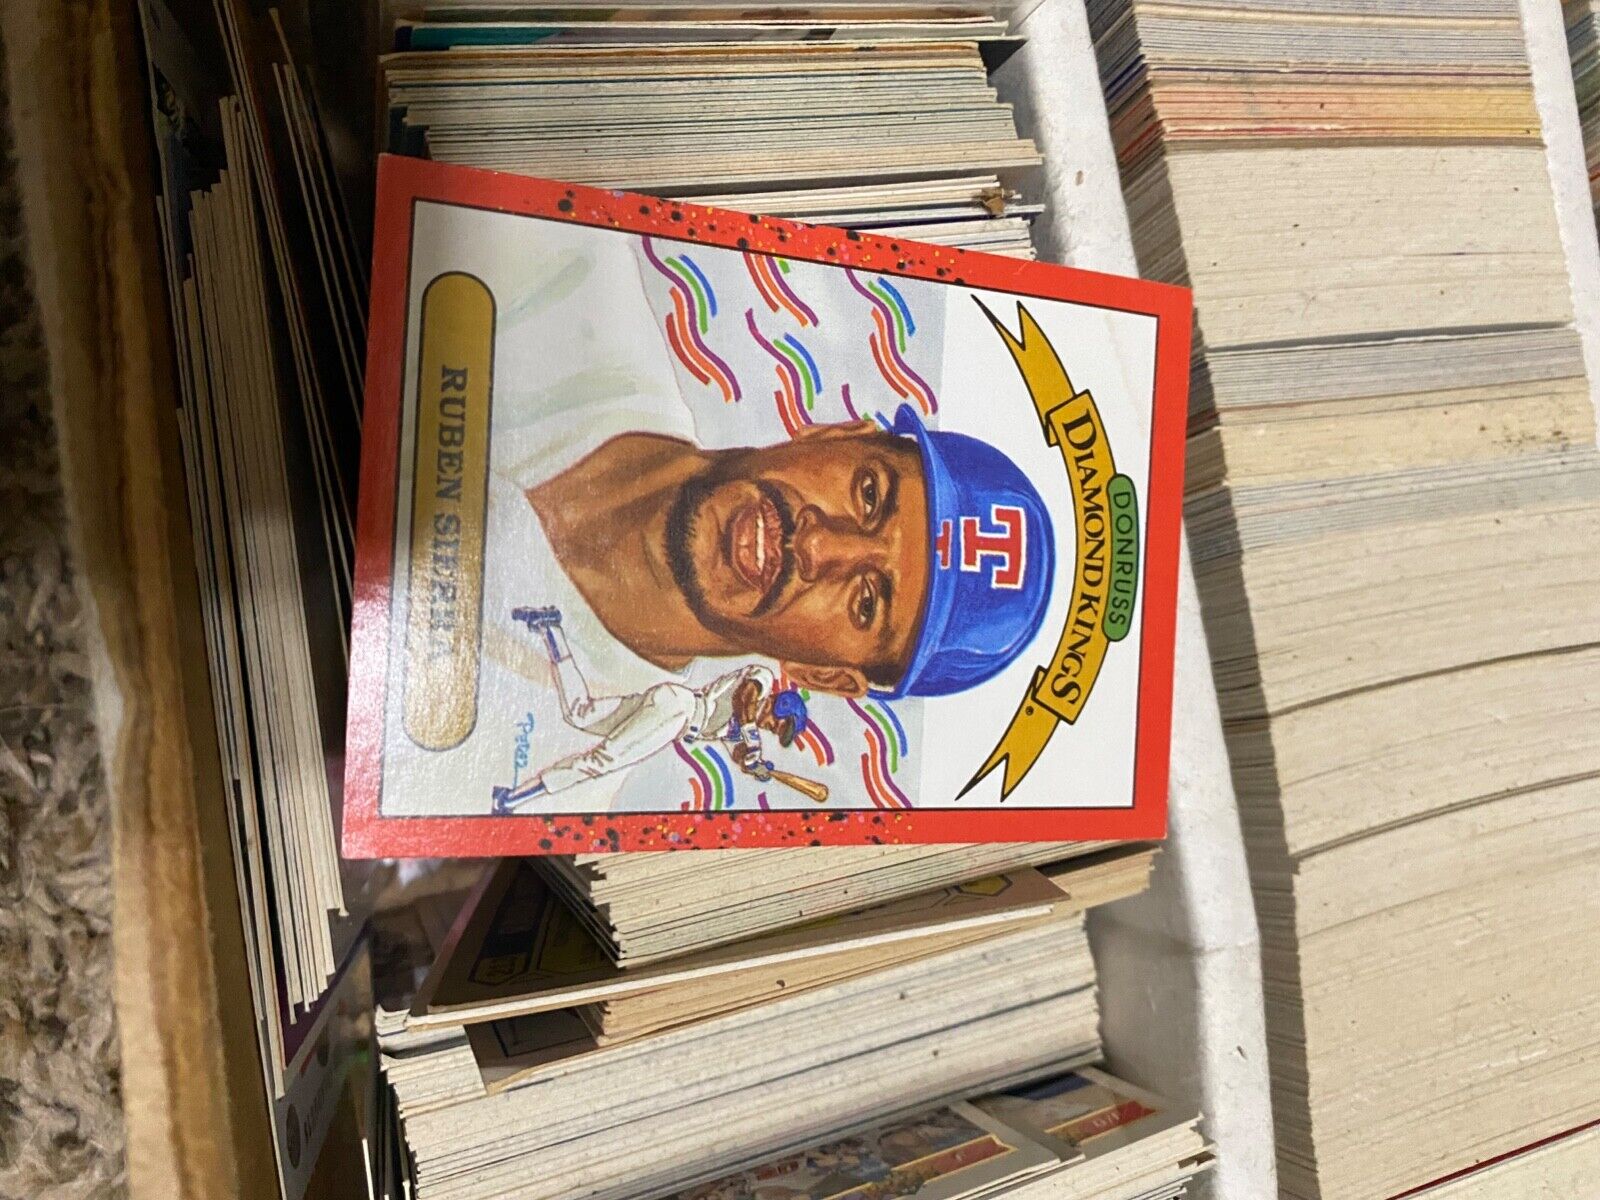 Big Lot of Baseball Cards. 80s-early 2000s, dusty but can be cleaned.